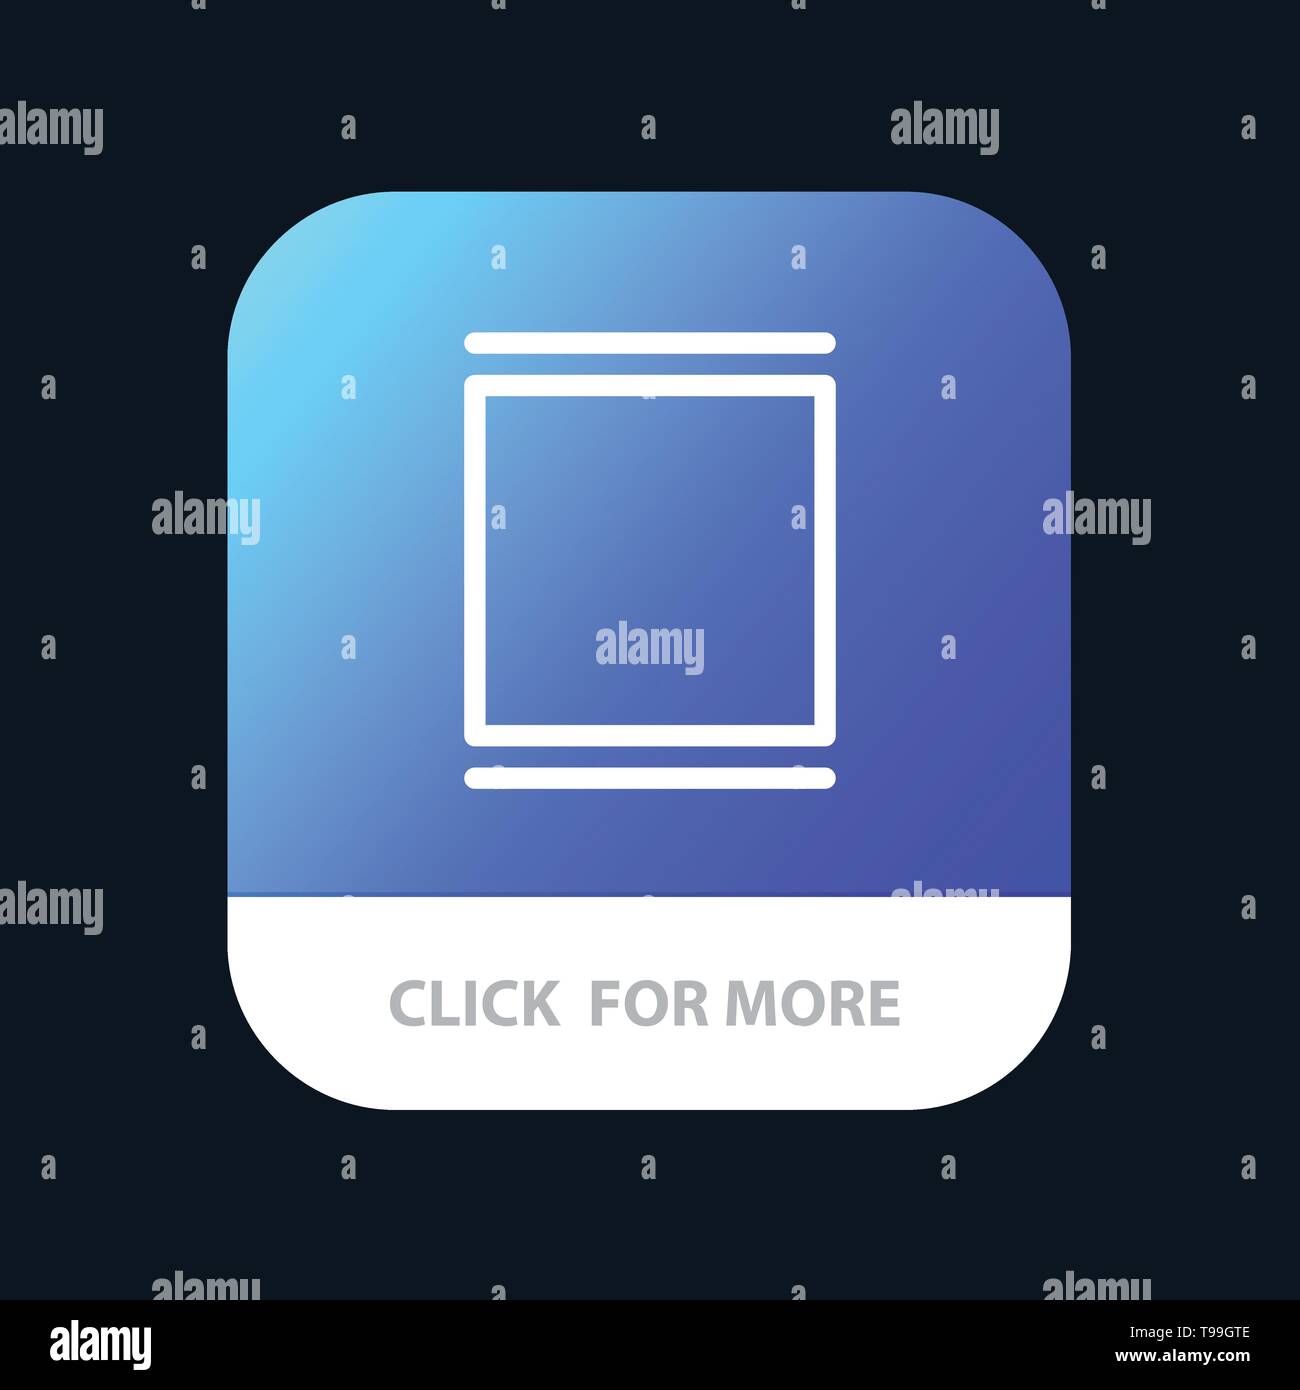 Gallery, Instagram, Sets, Timeline Mobile App Button. Android and IOS Line Version Stock Vector